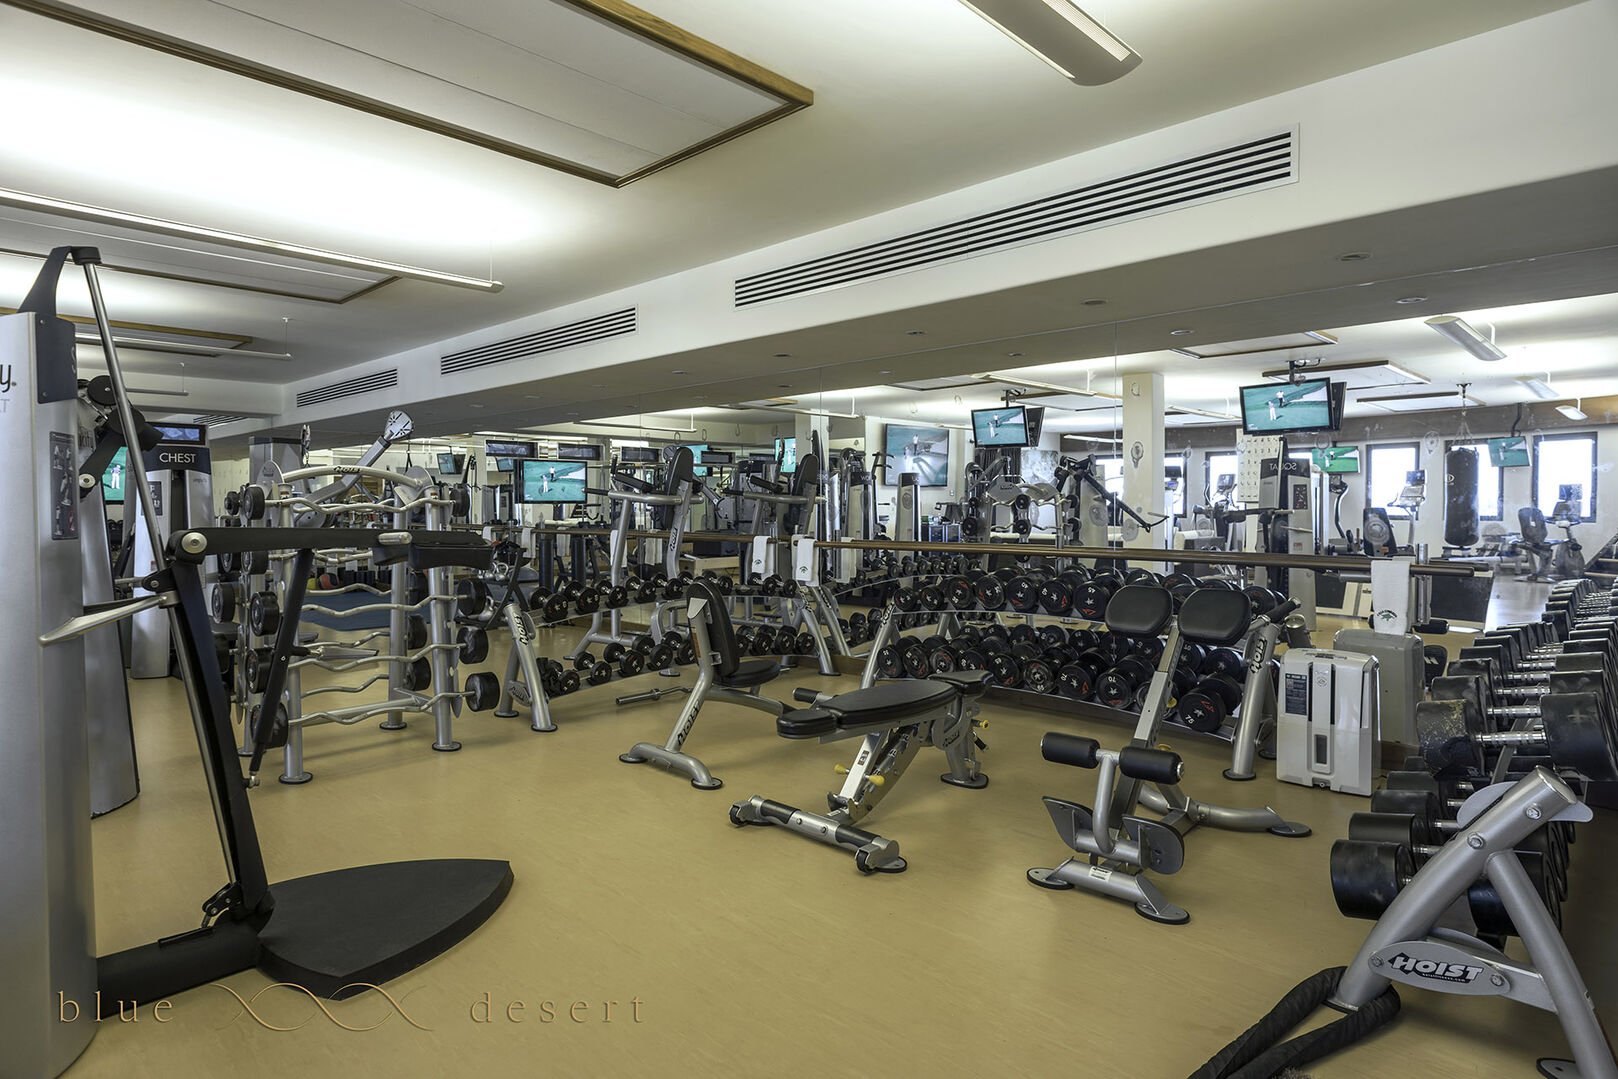 Includes a large variety of machines to work out.